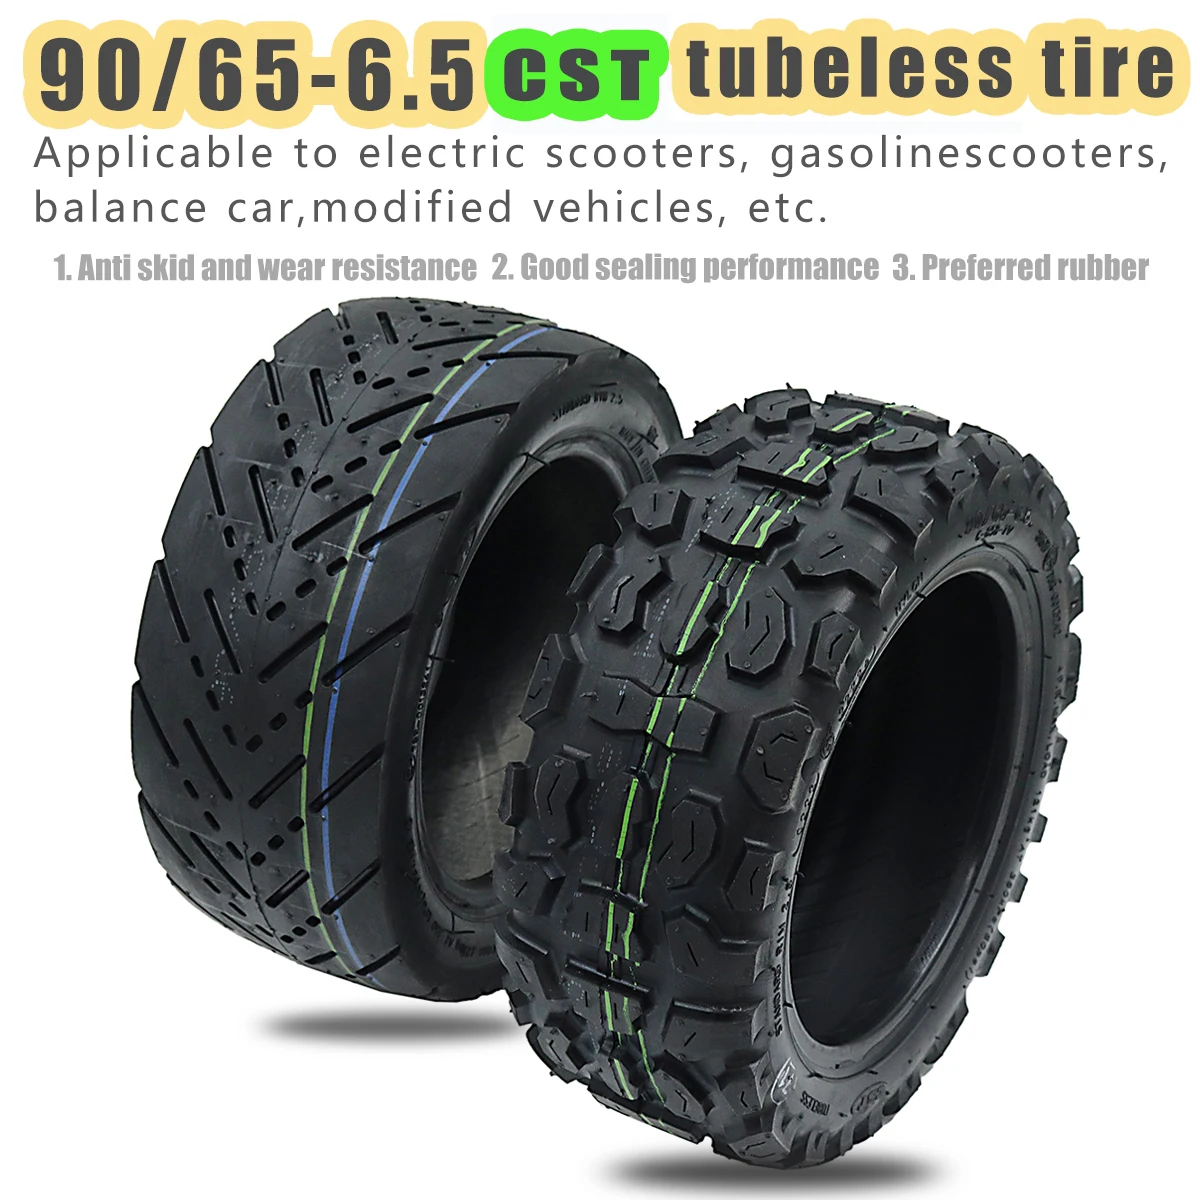 CST 11 Inch Tire 90/65-6.5 City Road Winter Snow Tires Tubeless Tire for Dualtron Ultra Speedual Plus Zero 11x Electric Scooters